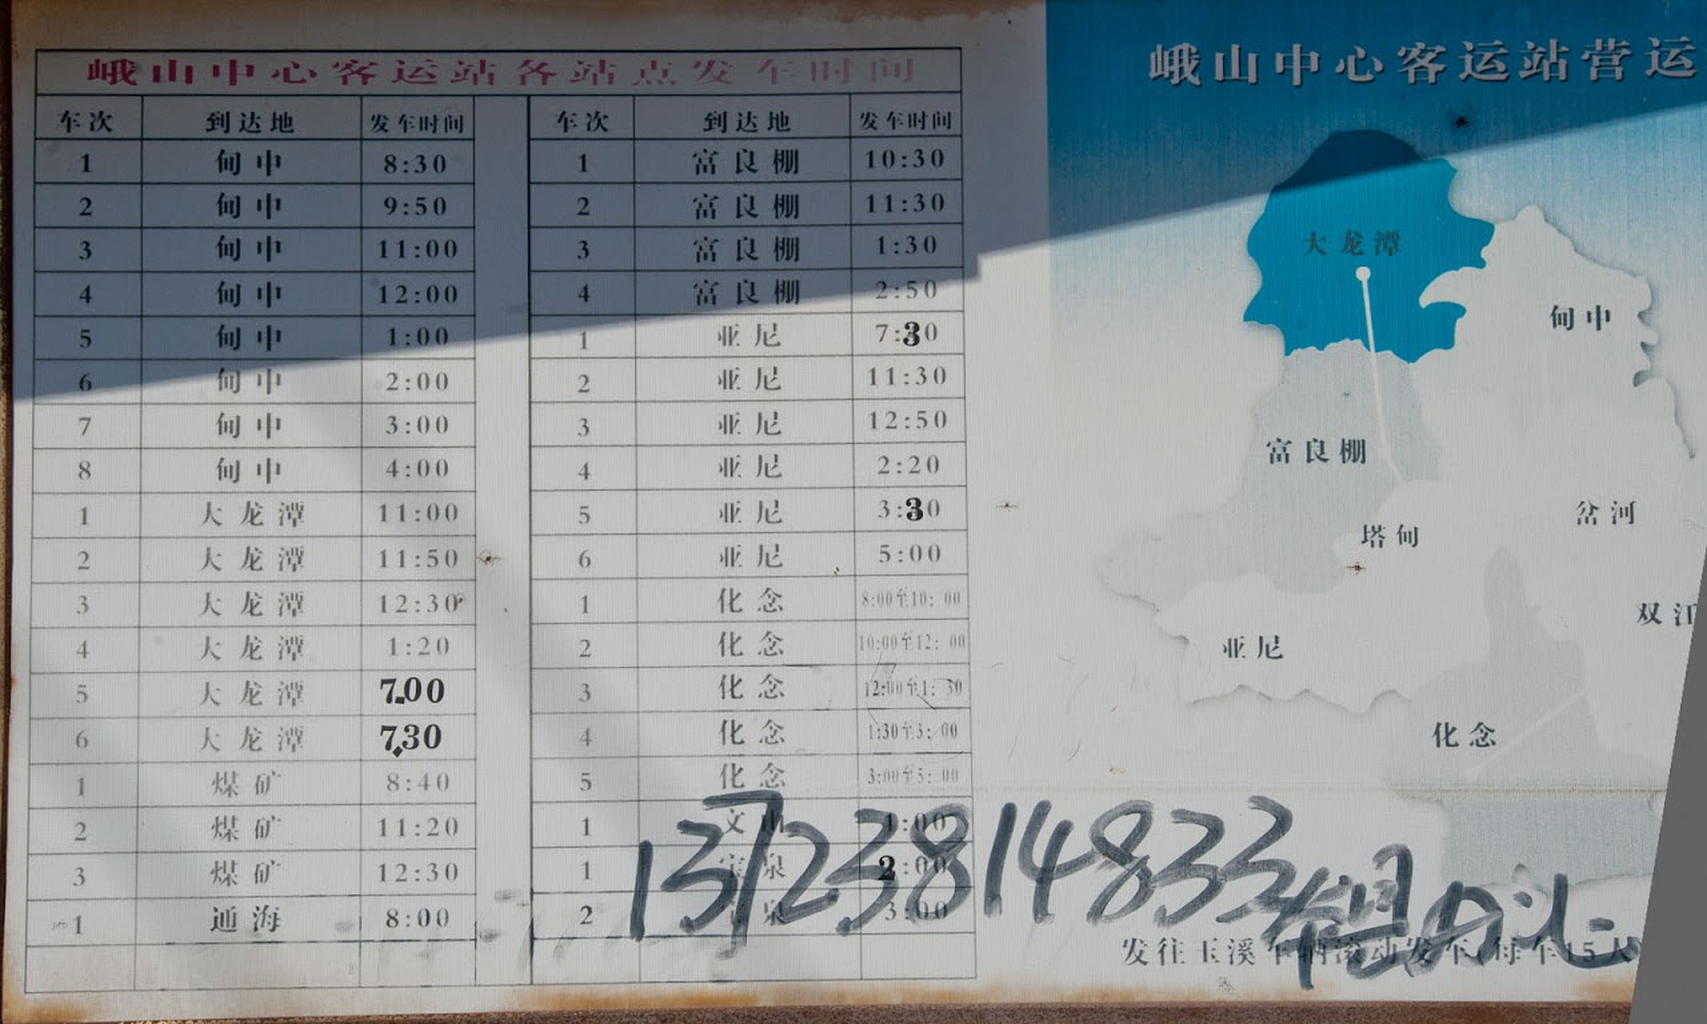 Picture: Busses to Yuxi and local destinations. 